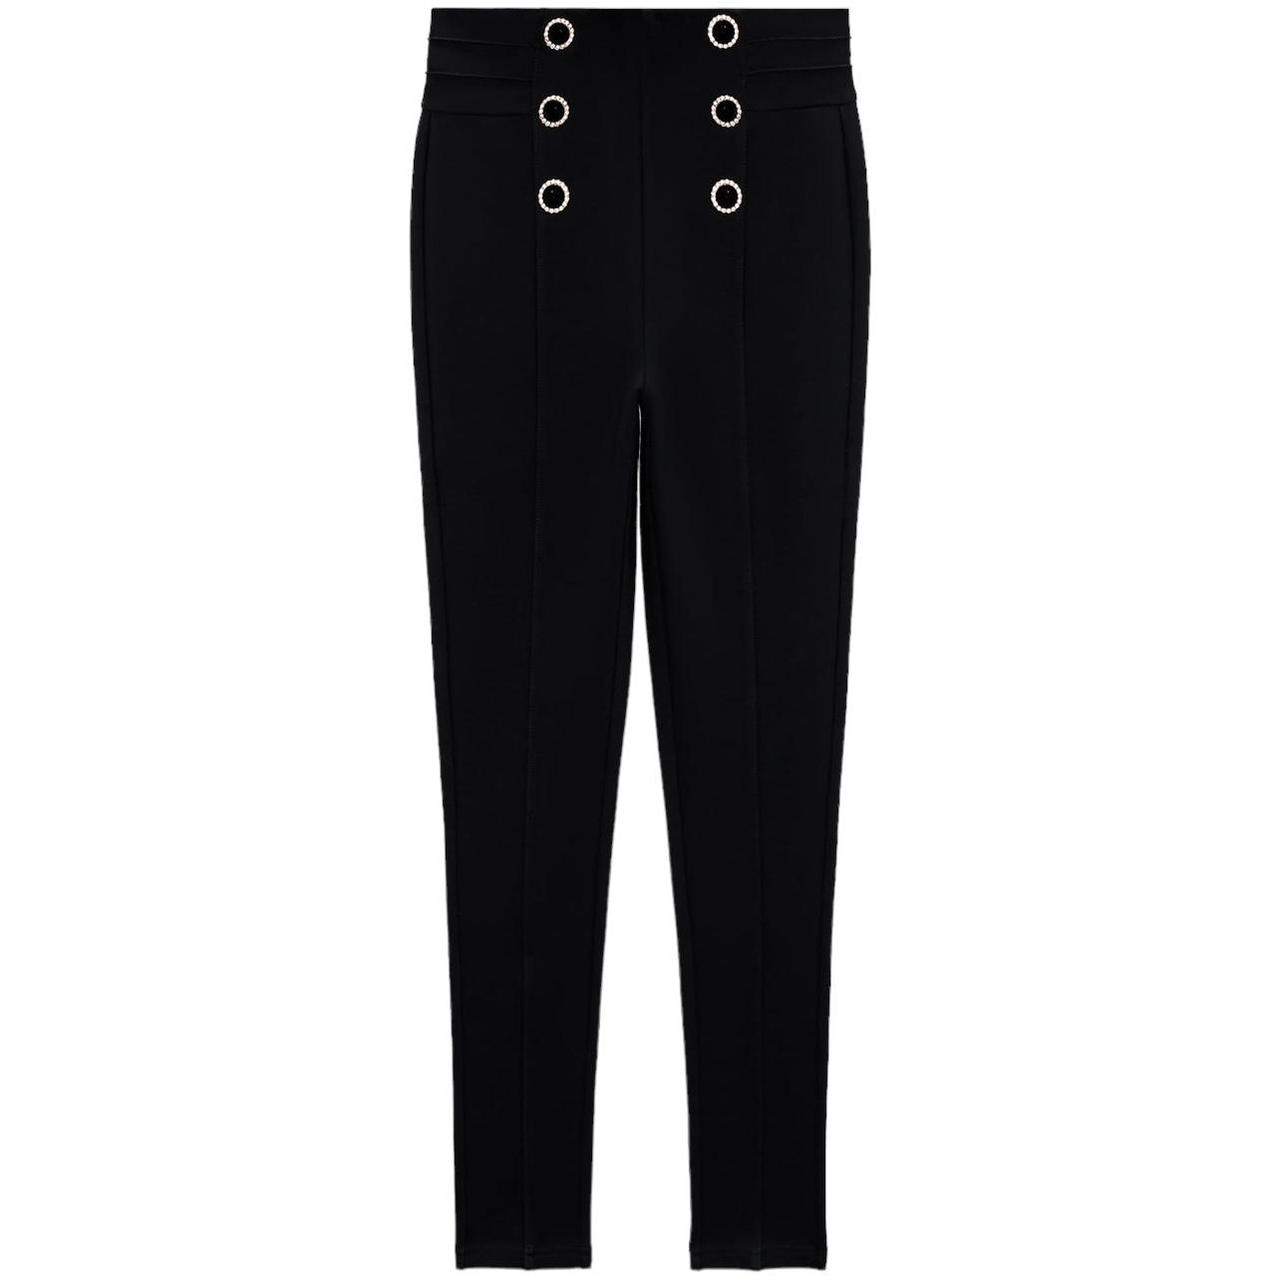 Zara Coated Leggings Reviewed | International Society of Precision  Agriculture